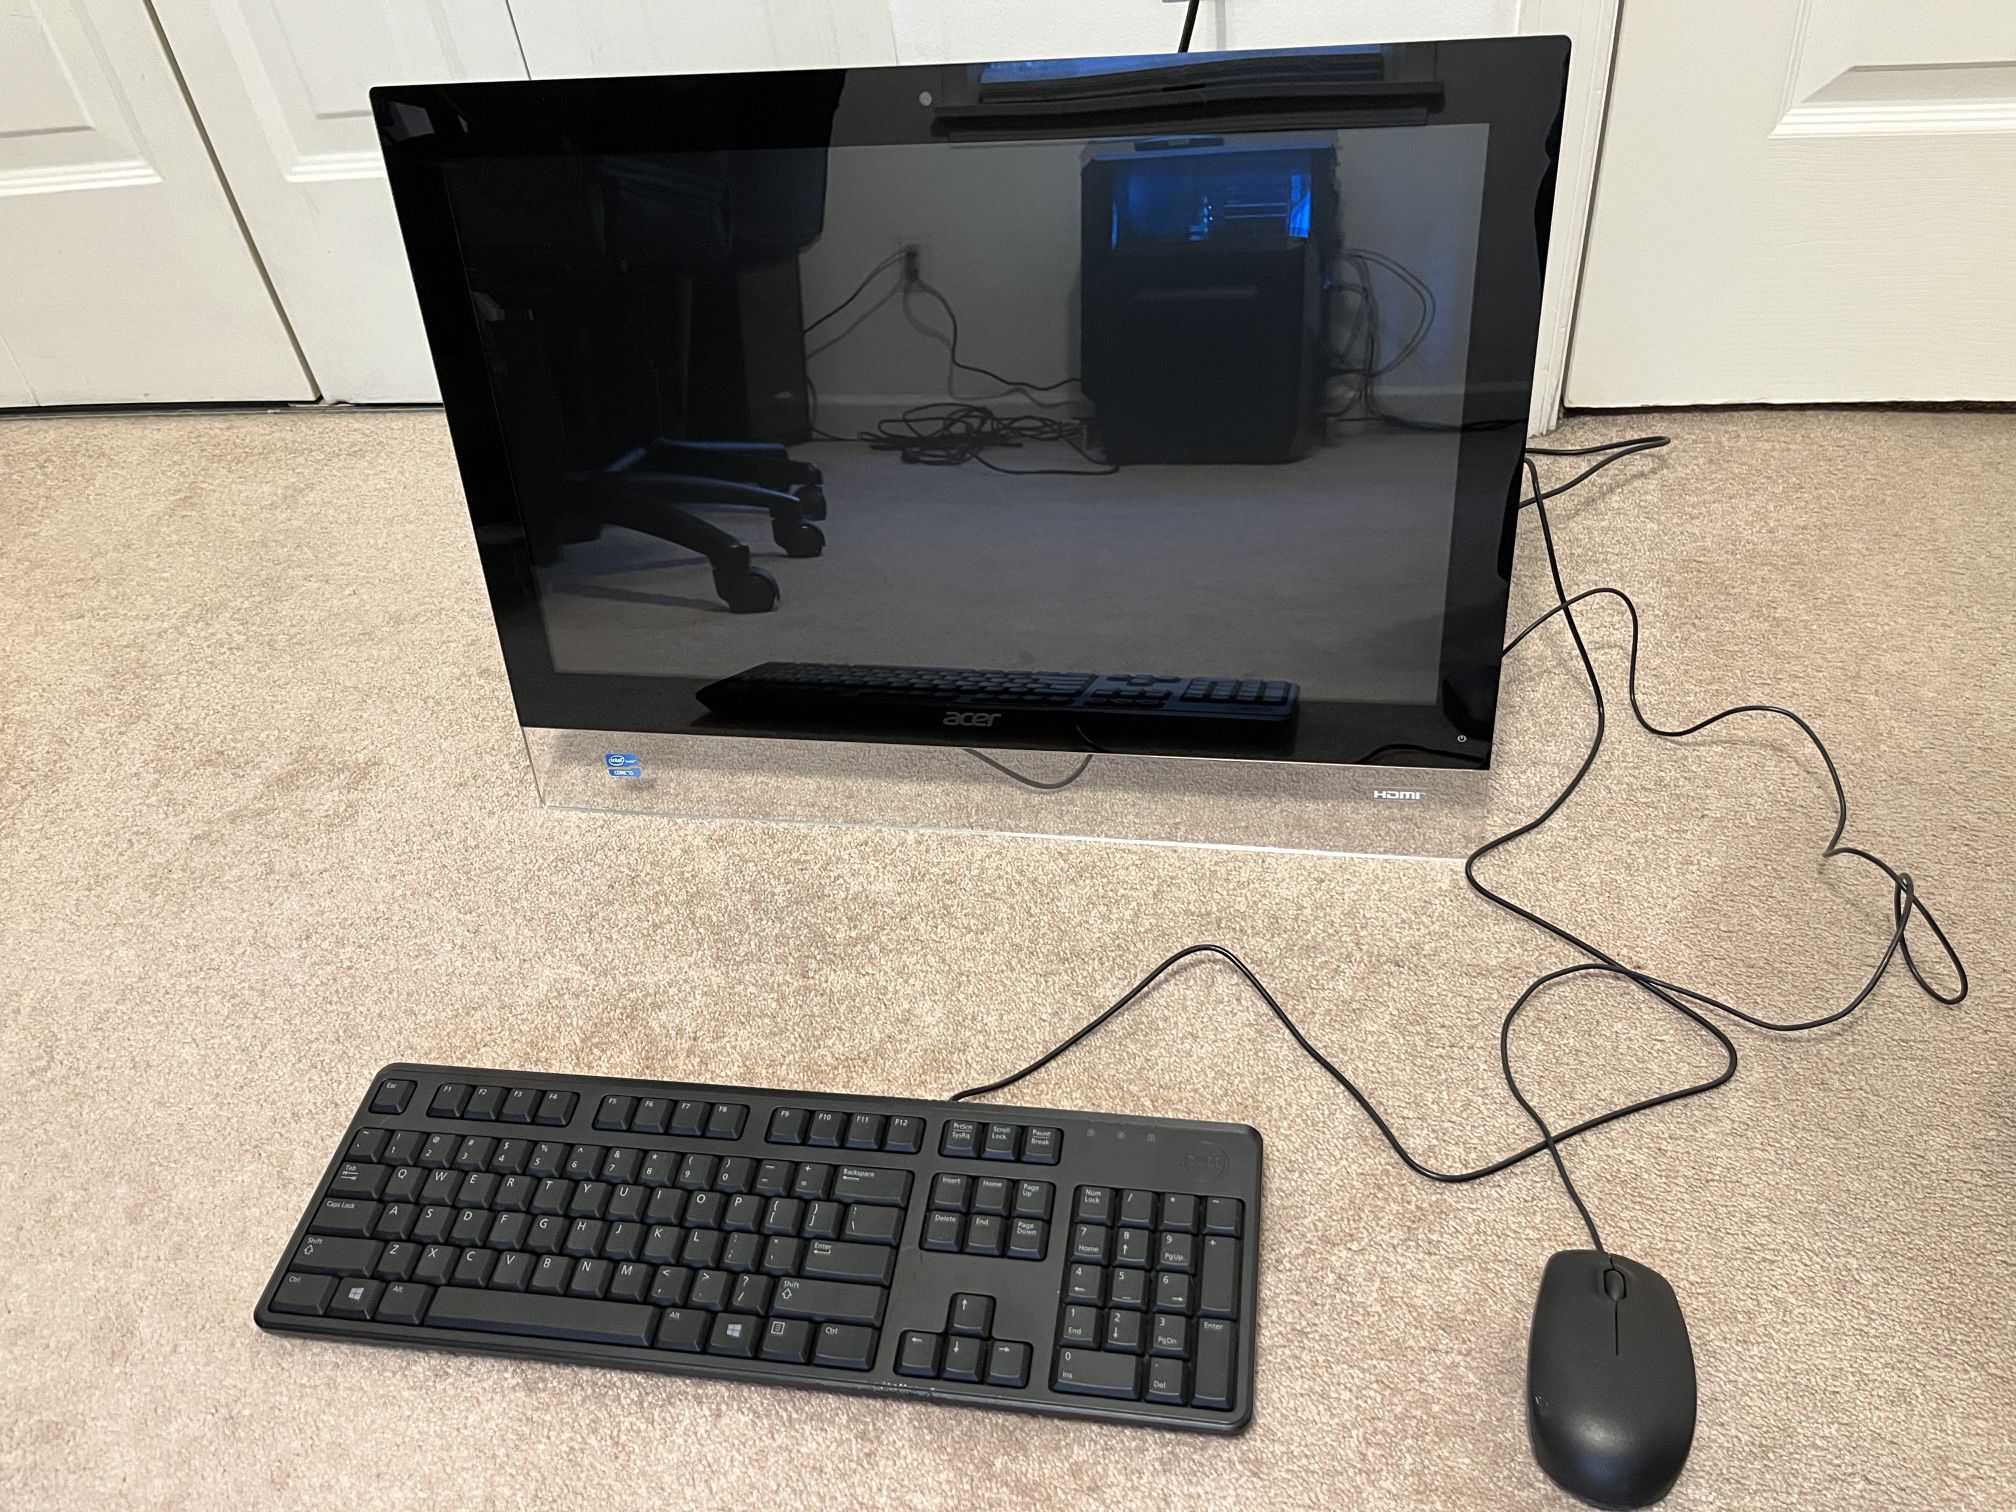 Acer Aspire All-in-one 5600u